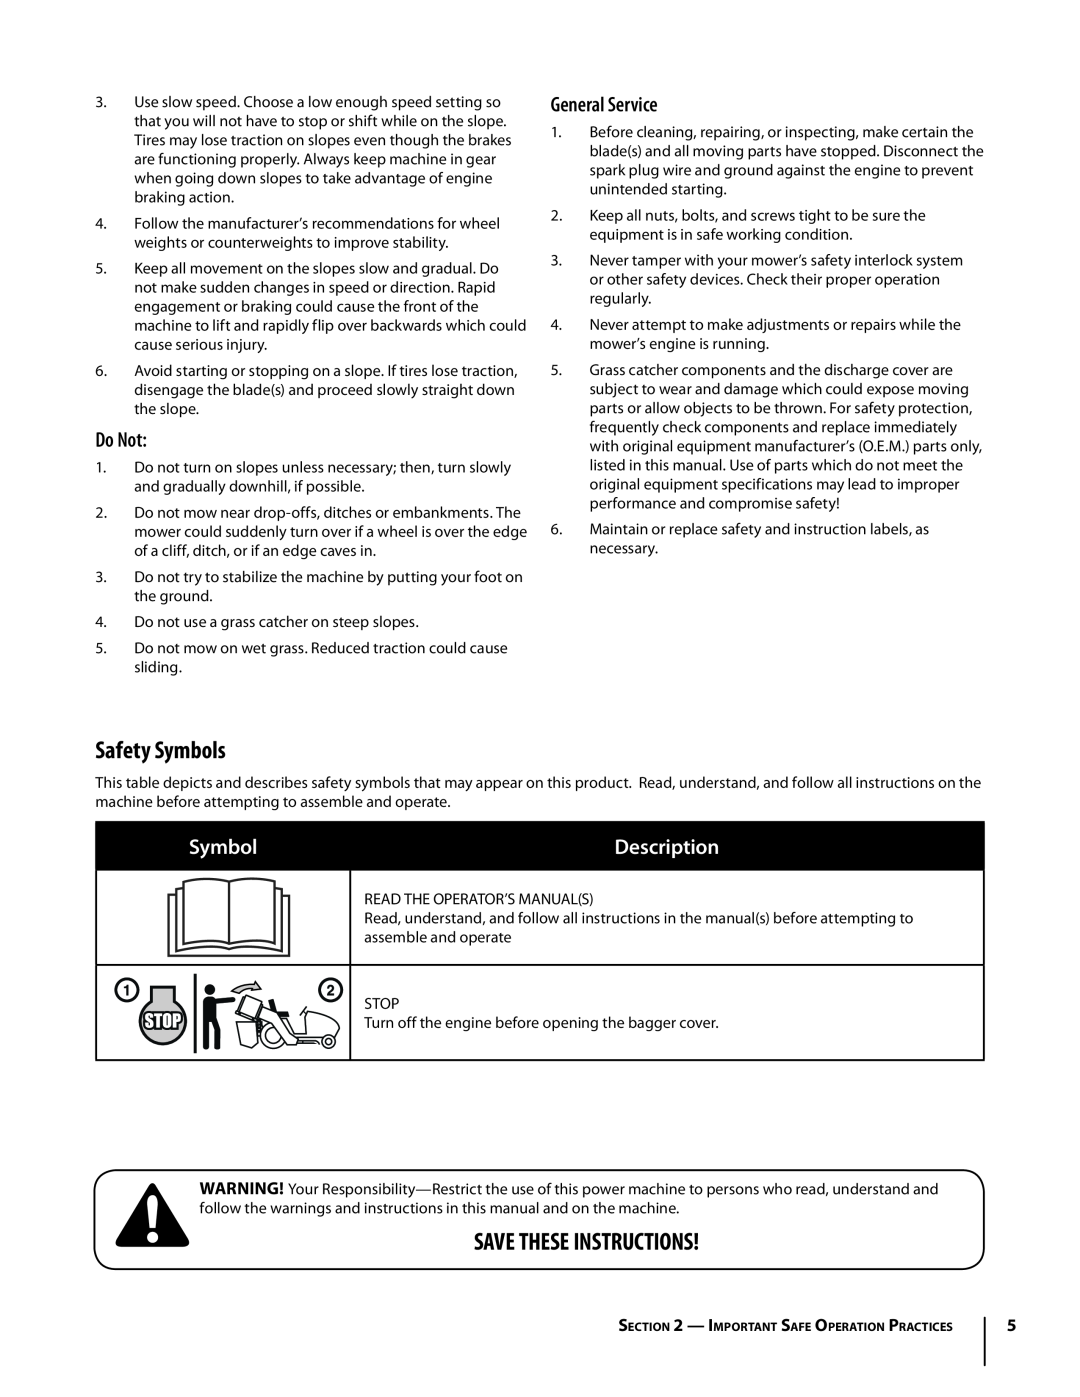 MTD 19A30002000, OEM-190-180A manual Safety Symbols, Save These Instructions, Do Not, General Service, Description 